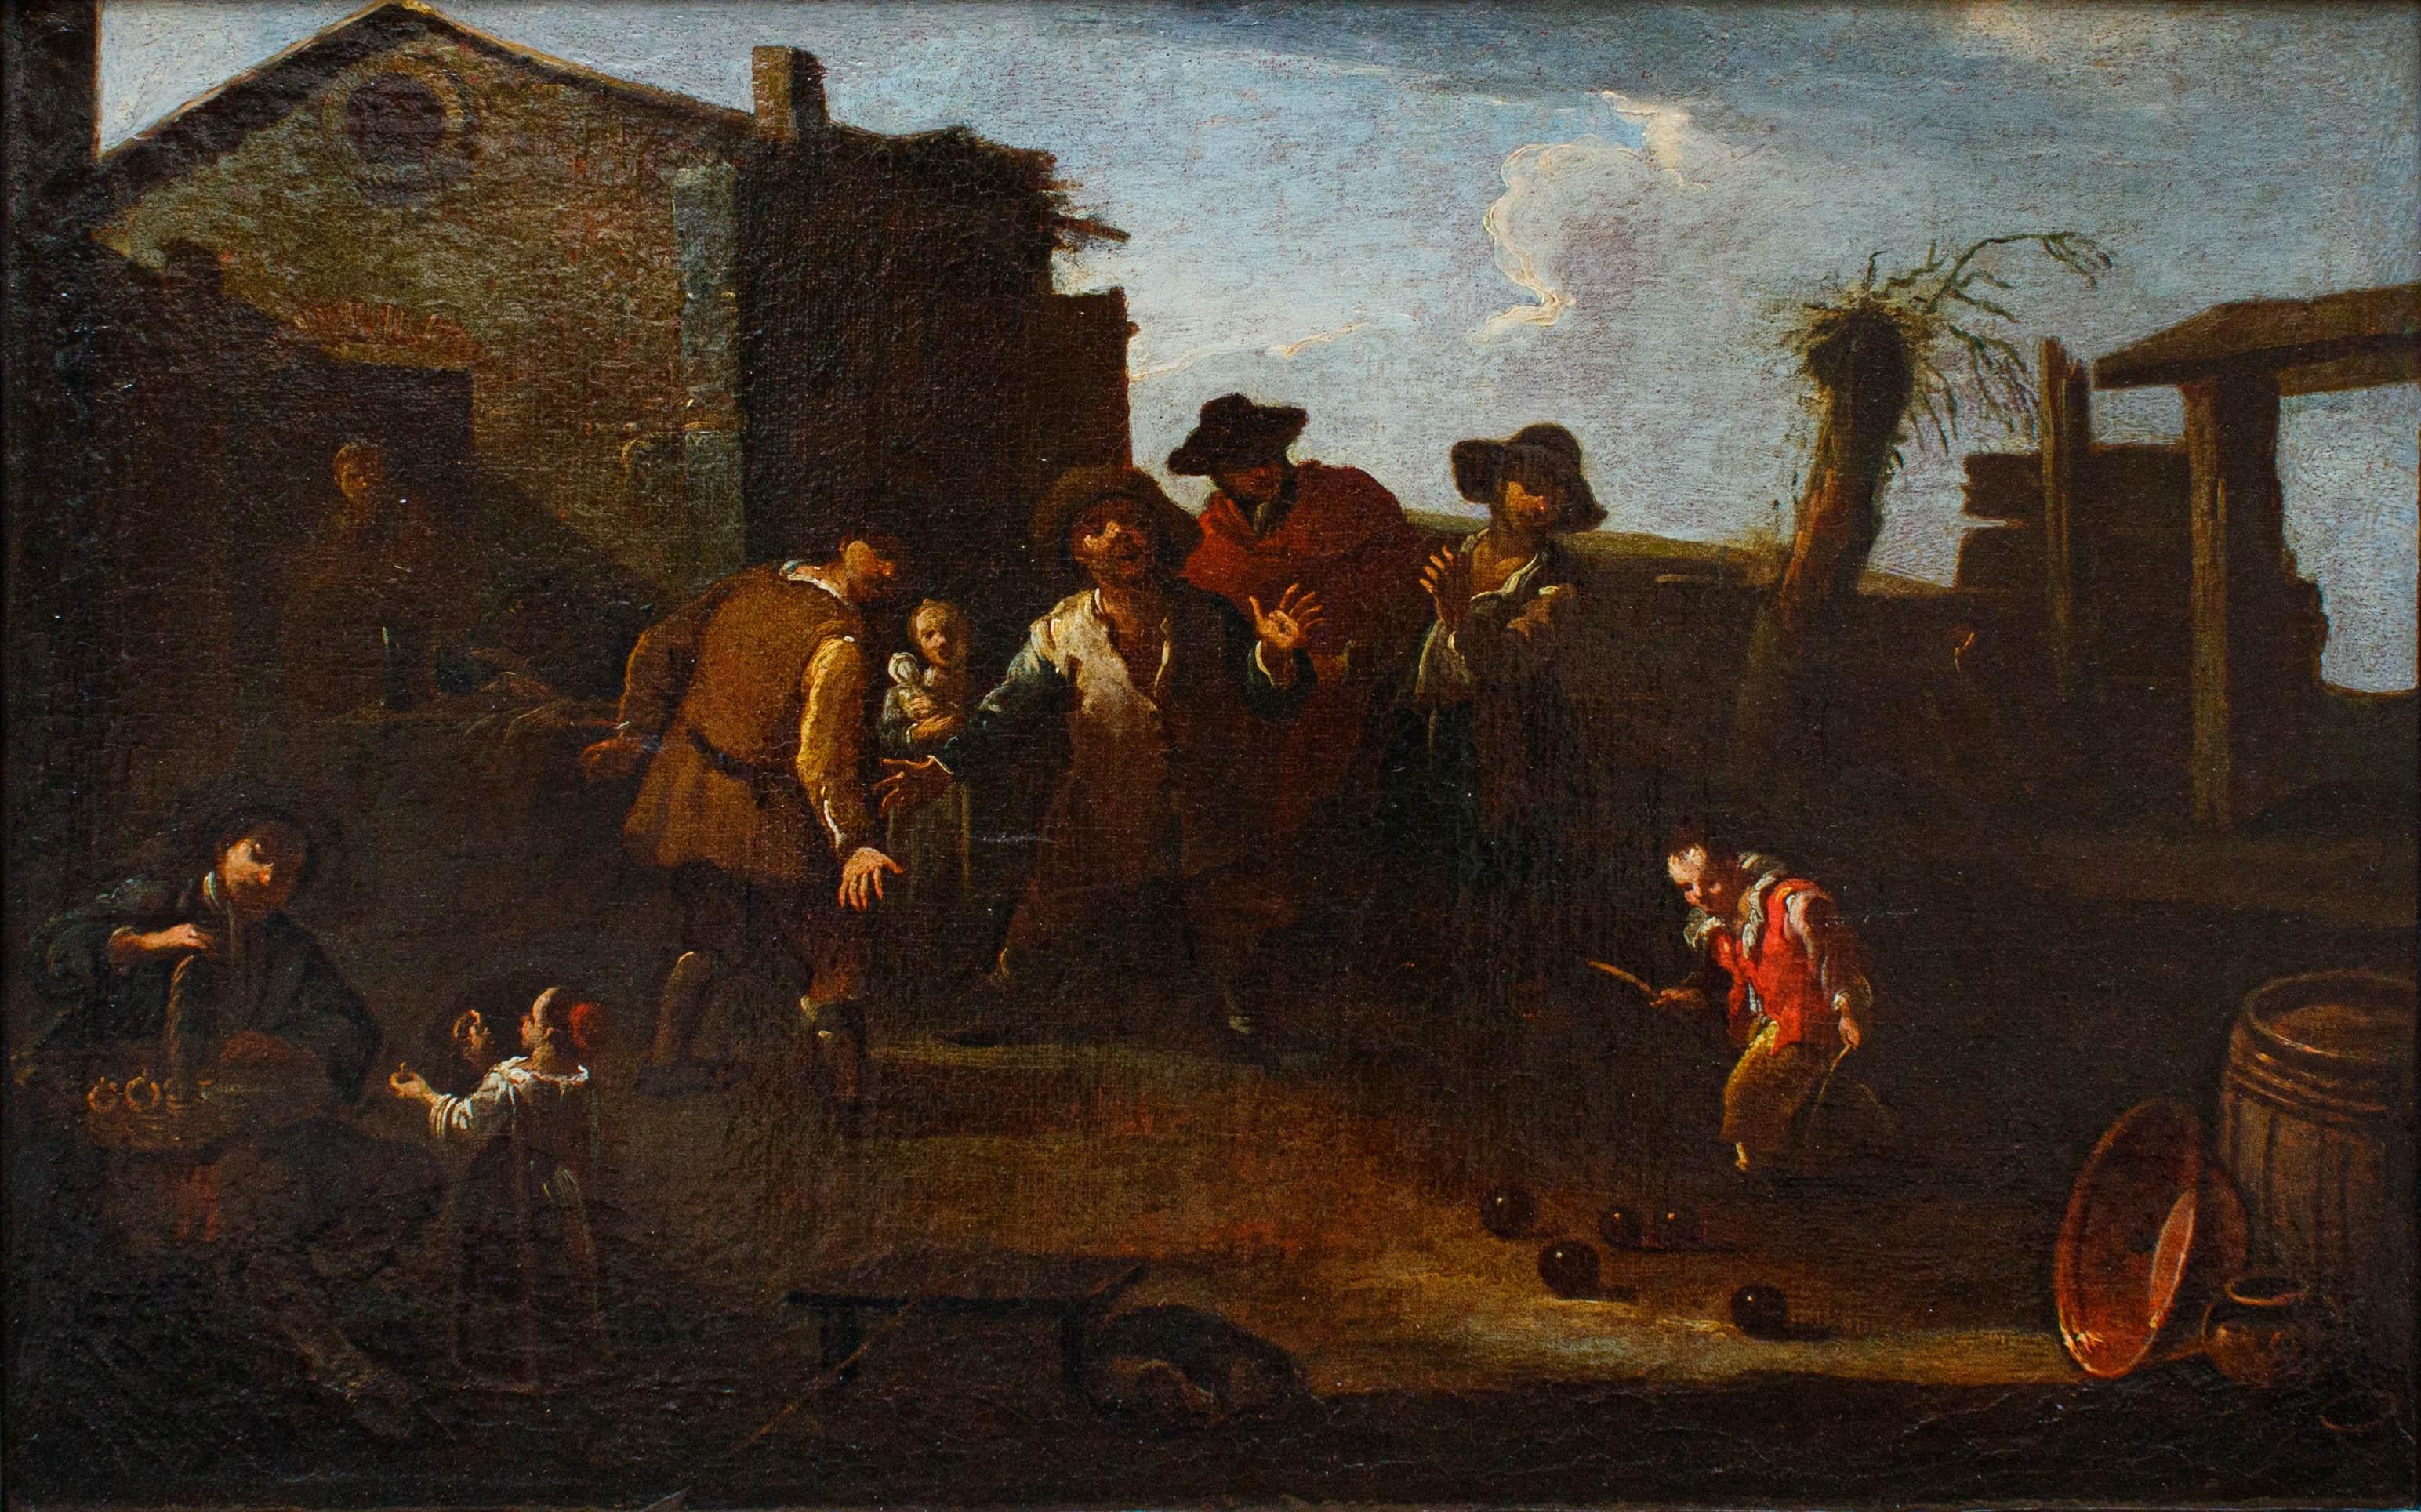 Domenico Olivero (Turin, August 1, 1679 - January 13, 1755)

Game of bowls

Oil on canvas, 43 x 65 cm

With frame, 54.5 x 76

Expert opinion Prof. Alberto Crispo

The painting shown here depicts peasants playing bowls near a farmhouse, while one of